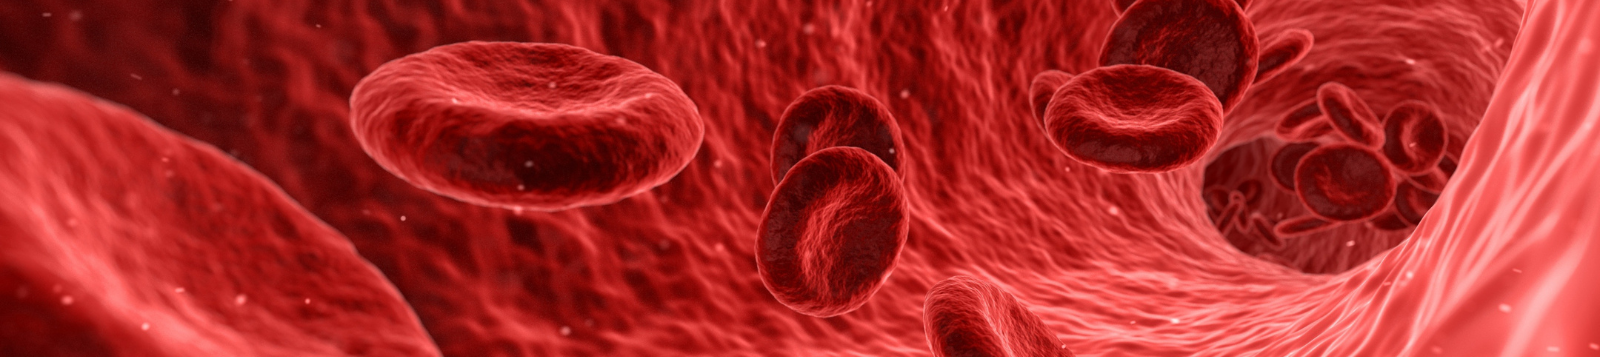 Picture of red blood cells.